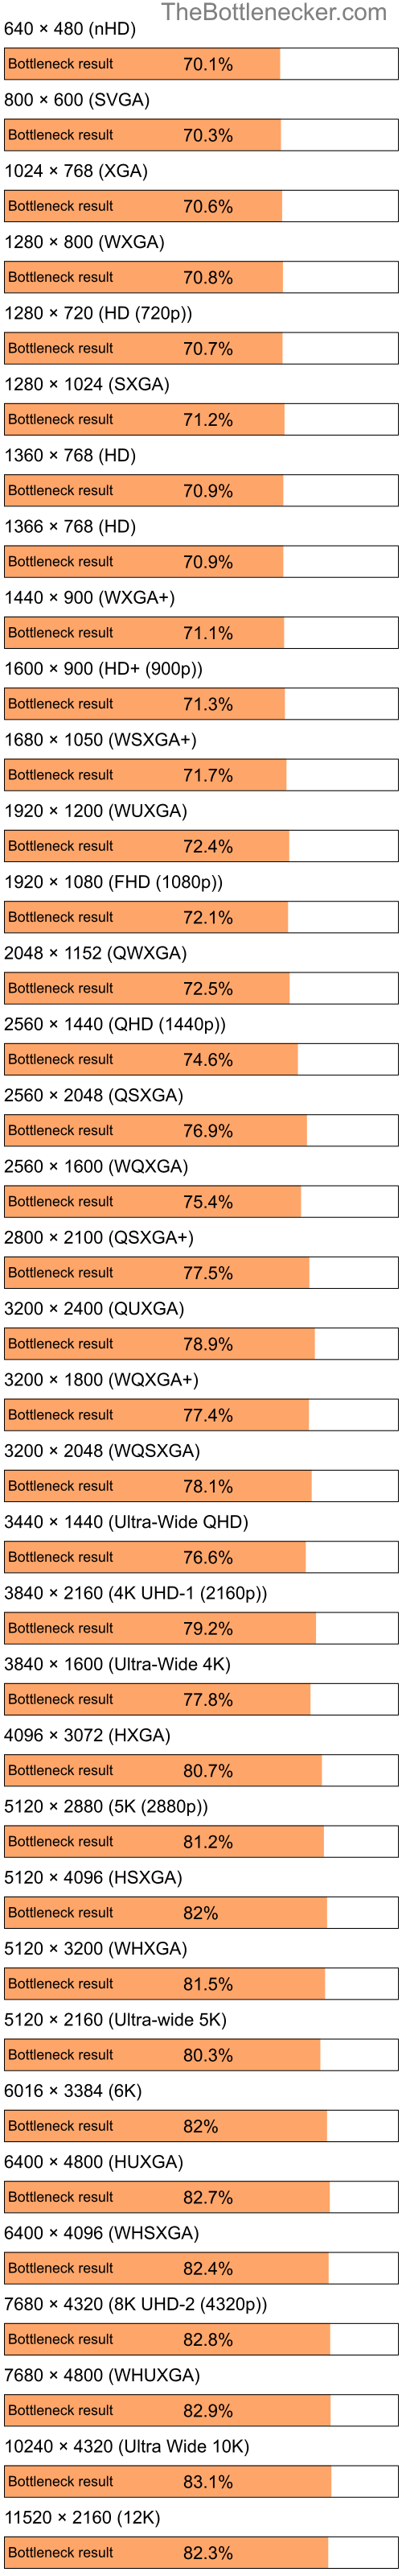 Bottleneck results by resolution for Intel Celeron M 420 and NVIDIA GeForce 9300 GS in Graphic Card Intense Tasks